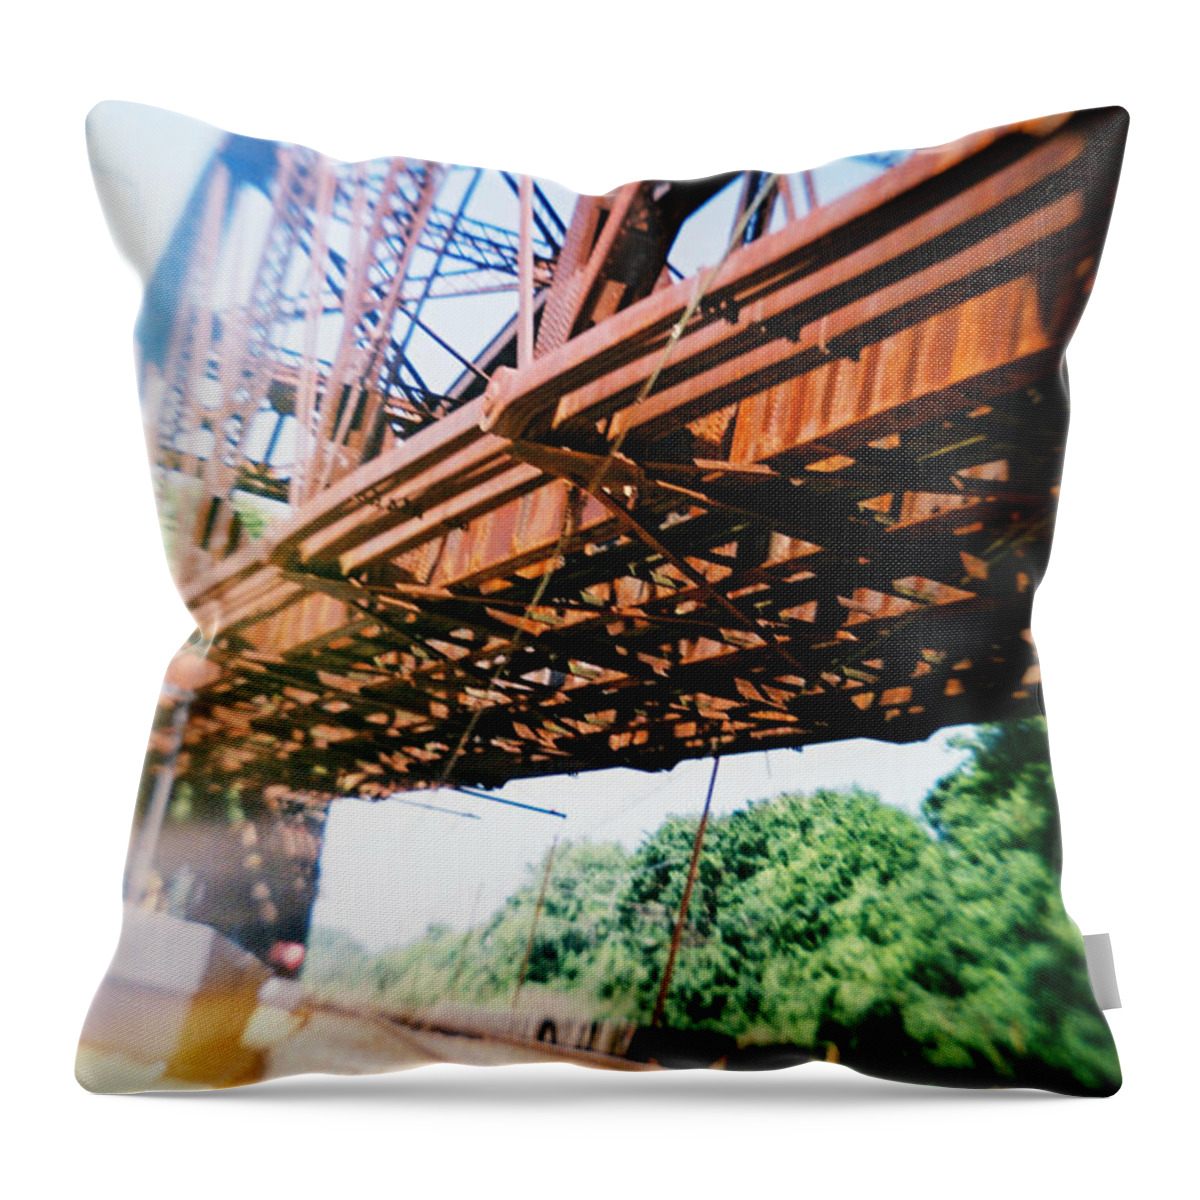 Recesky Throw Pillow featuring the photograph Recesky - Whitford Railroad Bridge by Richard Reeve